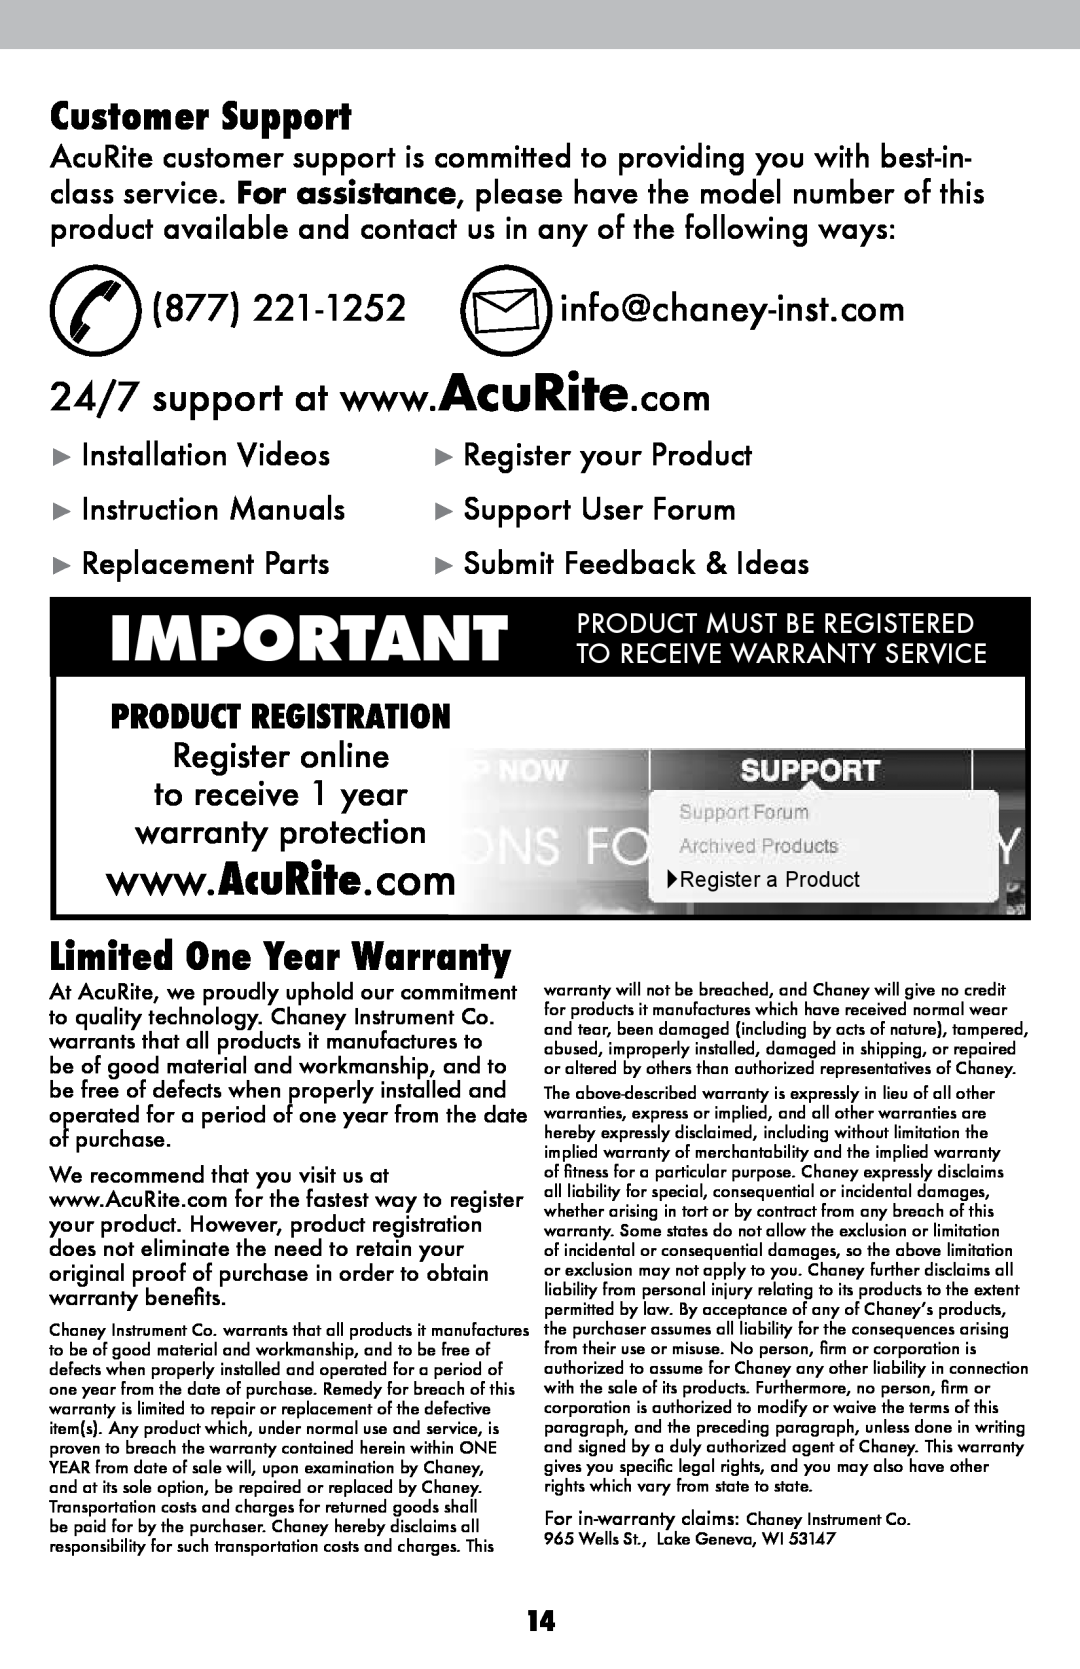 Acu-Rite 2008 Customer Support, 877 221-1252 info@chaney-inst.com, Limited One Year Warranty, Register online 